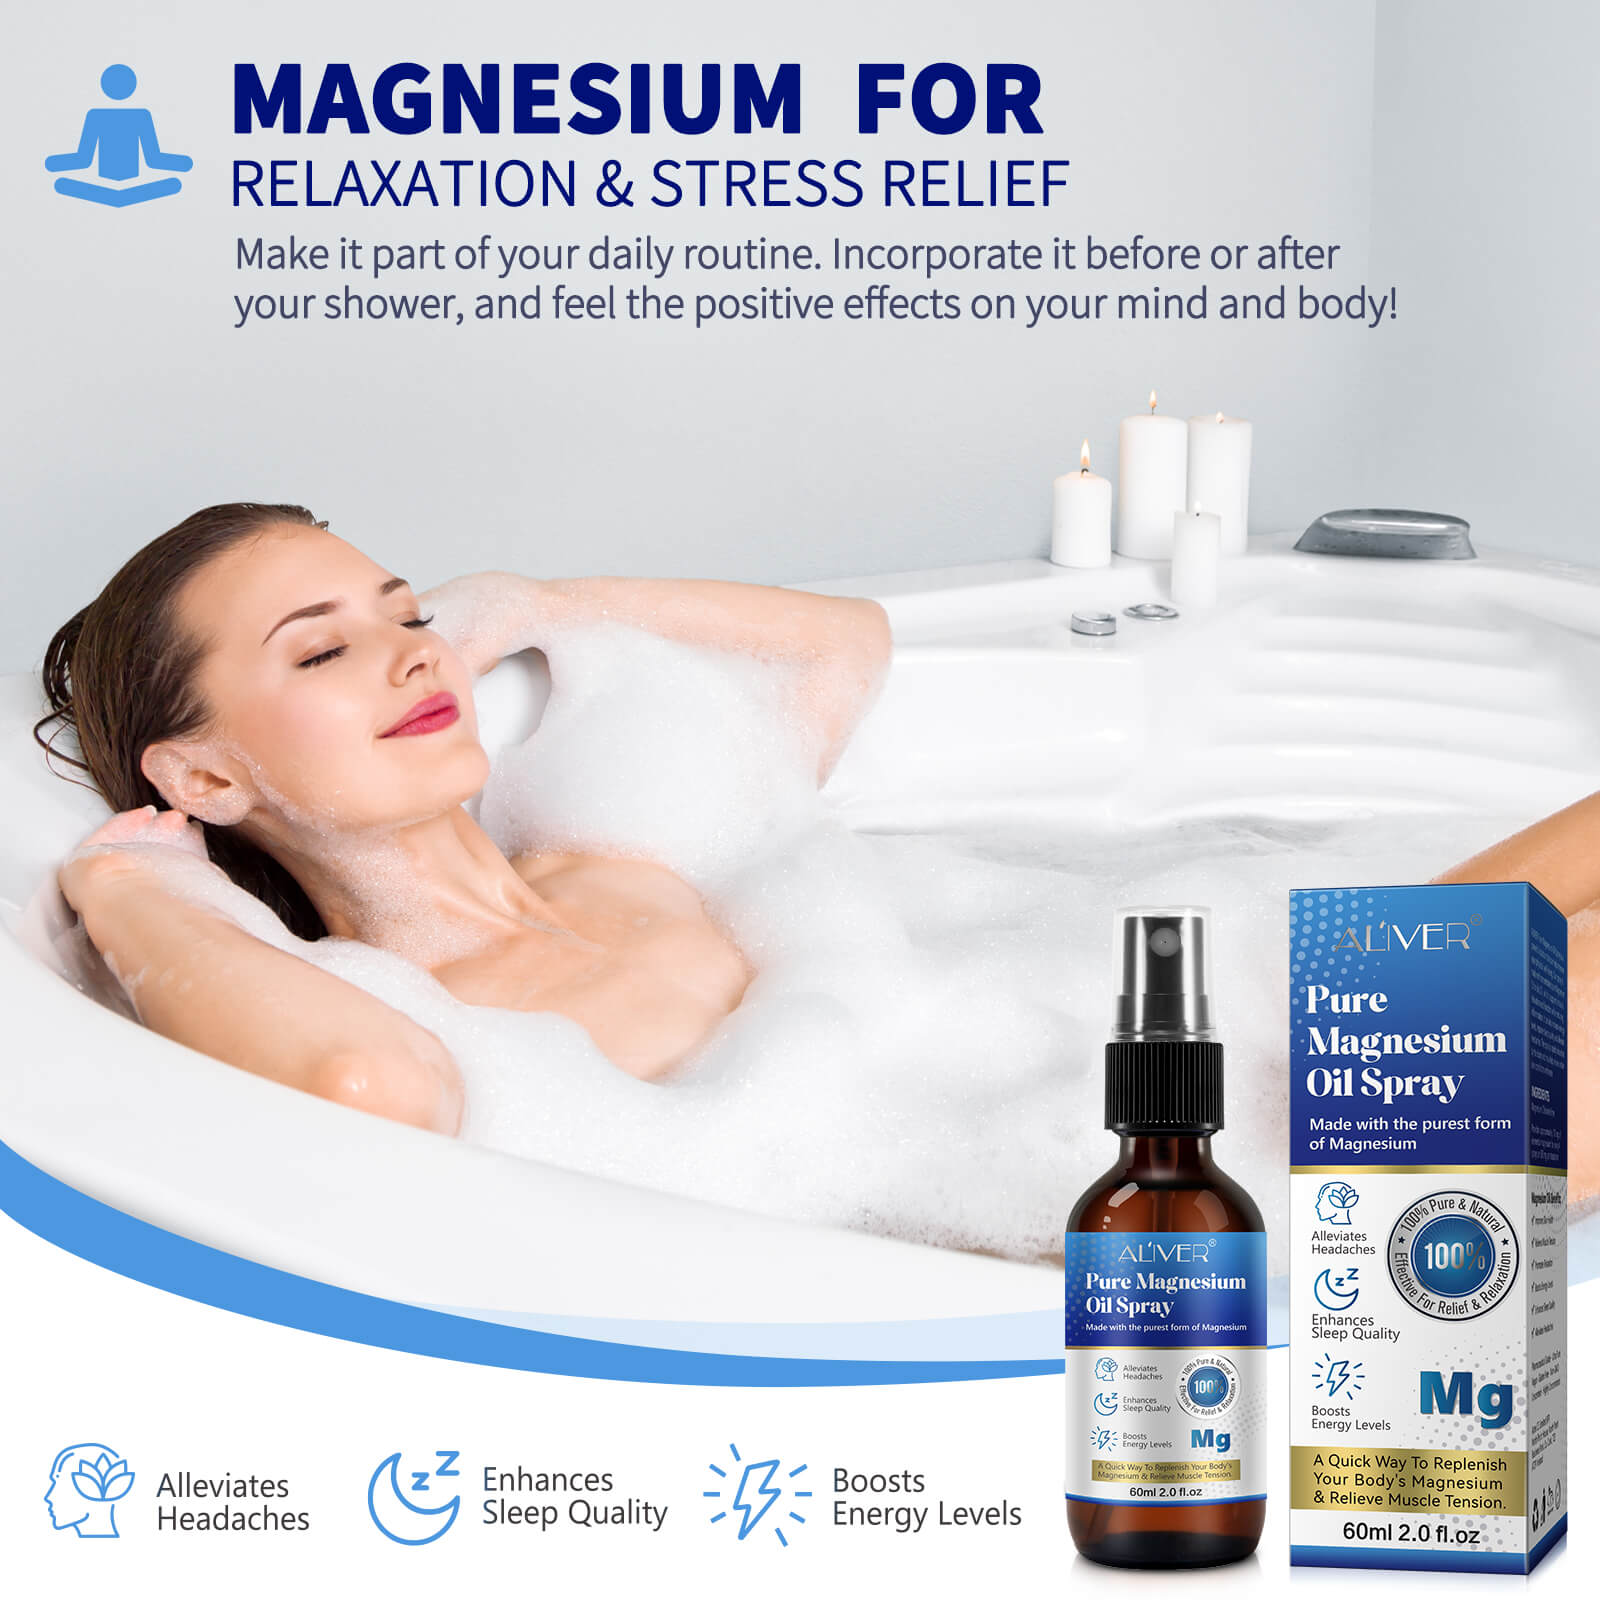 magnesium oil spray used for relaxation and stress relief